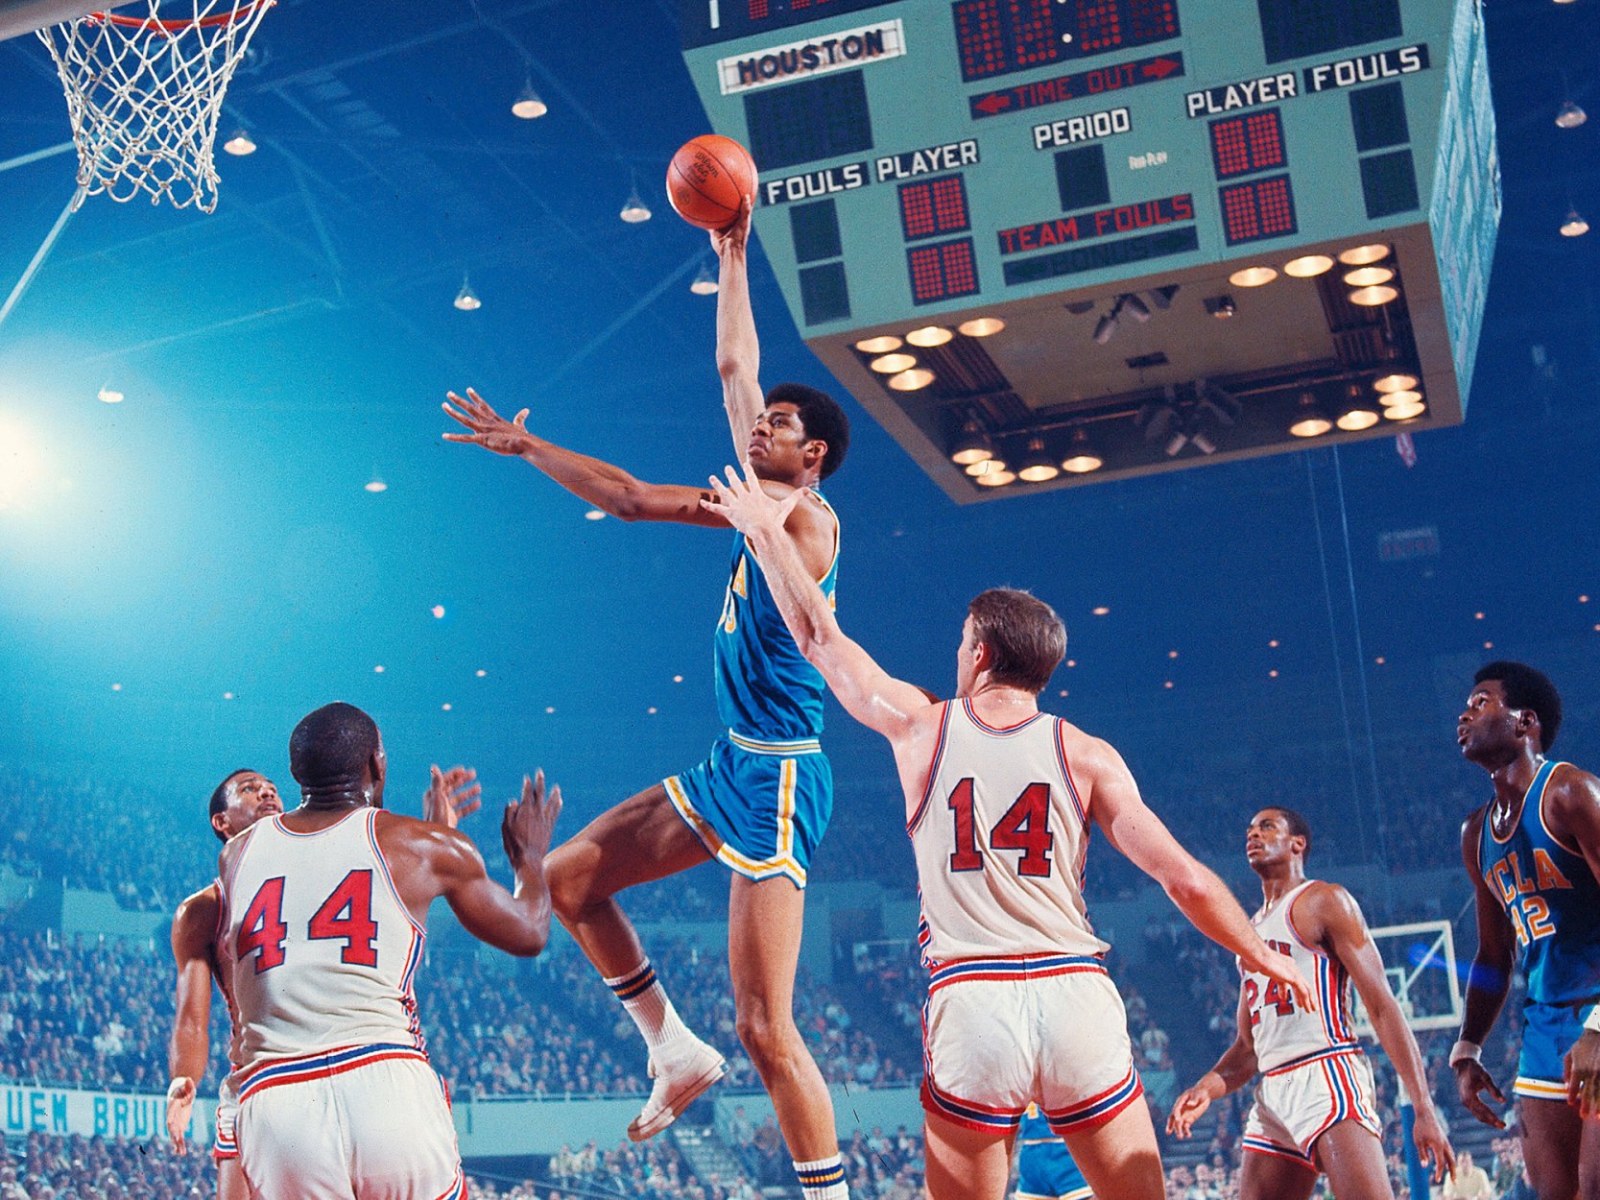 Kareem Abdul-Jabbar in 1967 Was Dominant, Smart and Rightfully